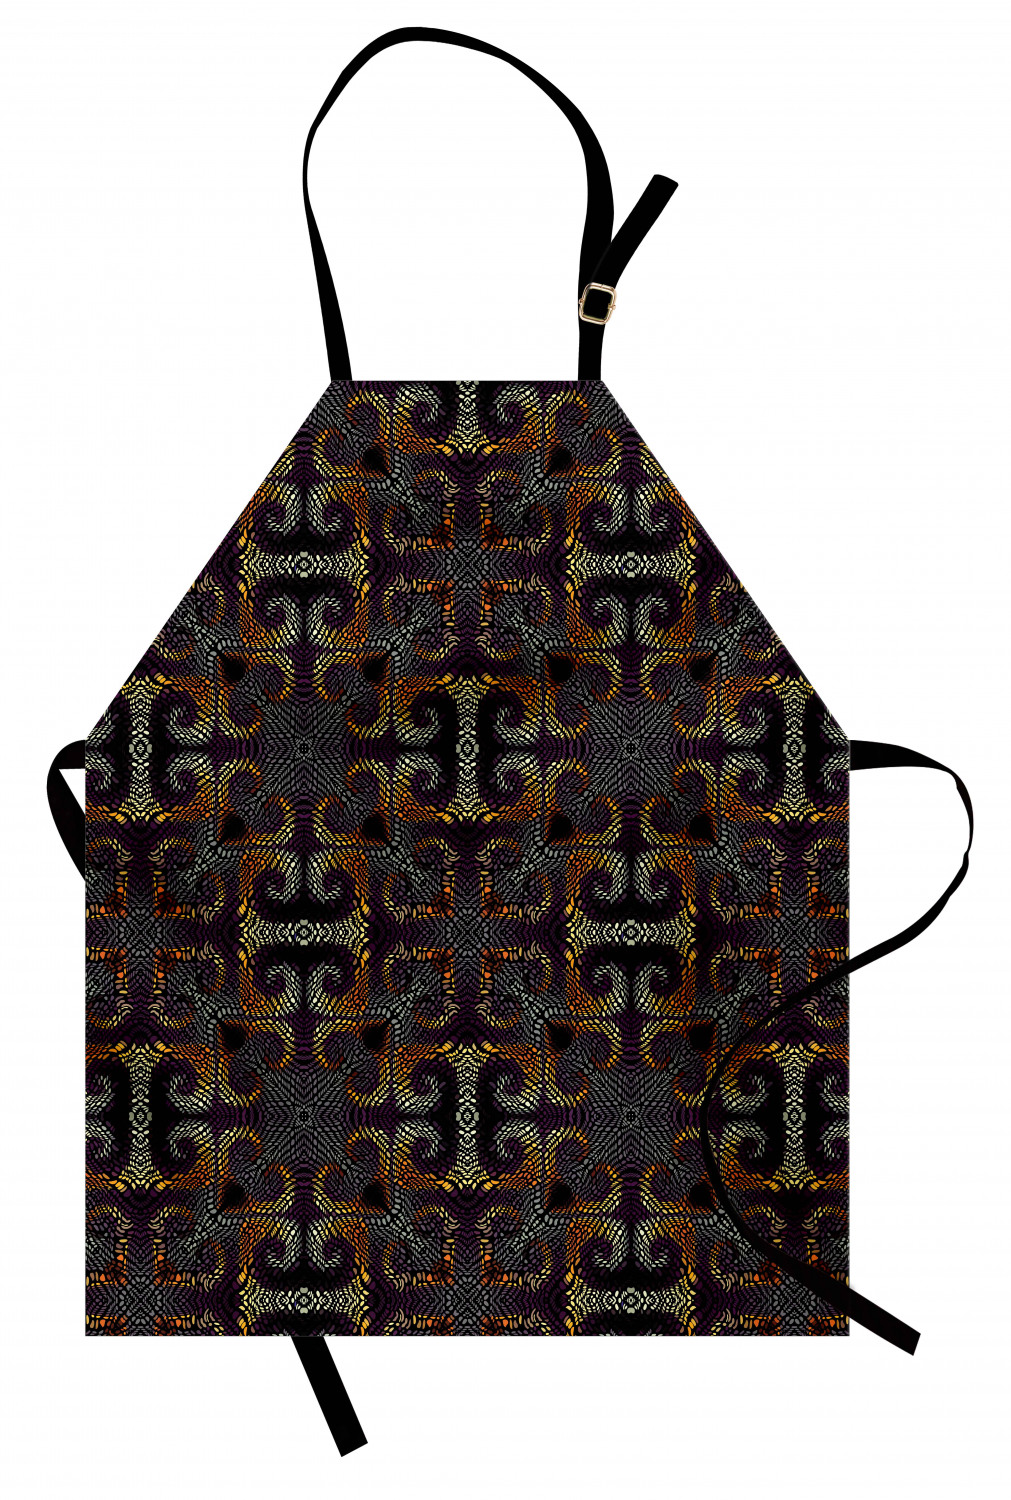 Abstract Apron, Irregular Curved and Mosaic Inspired Motifs Continuing Ornamental Elements, Unisex Kitchen Bib with Adjustable Neck for Cooking Gardening, Adult Size, Multicolor, by Ambesonne - image 1 of 4